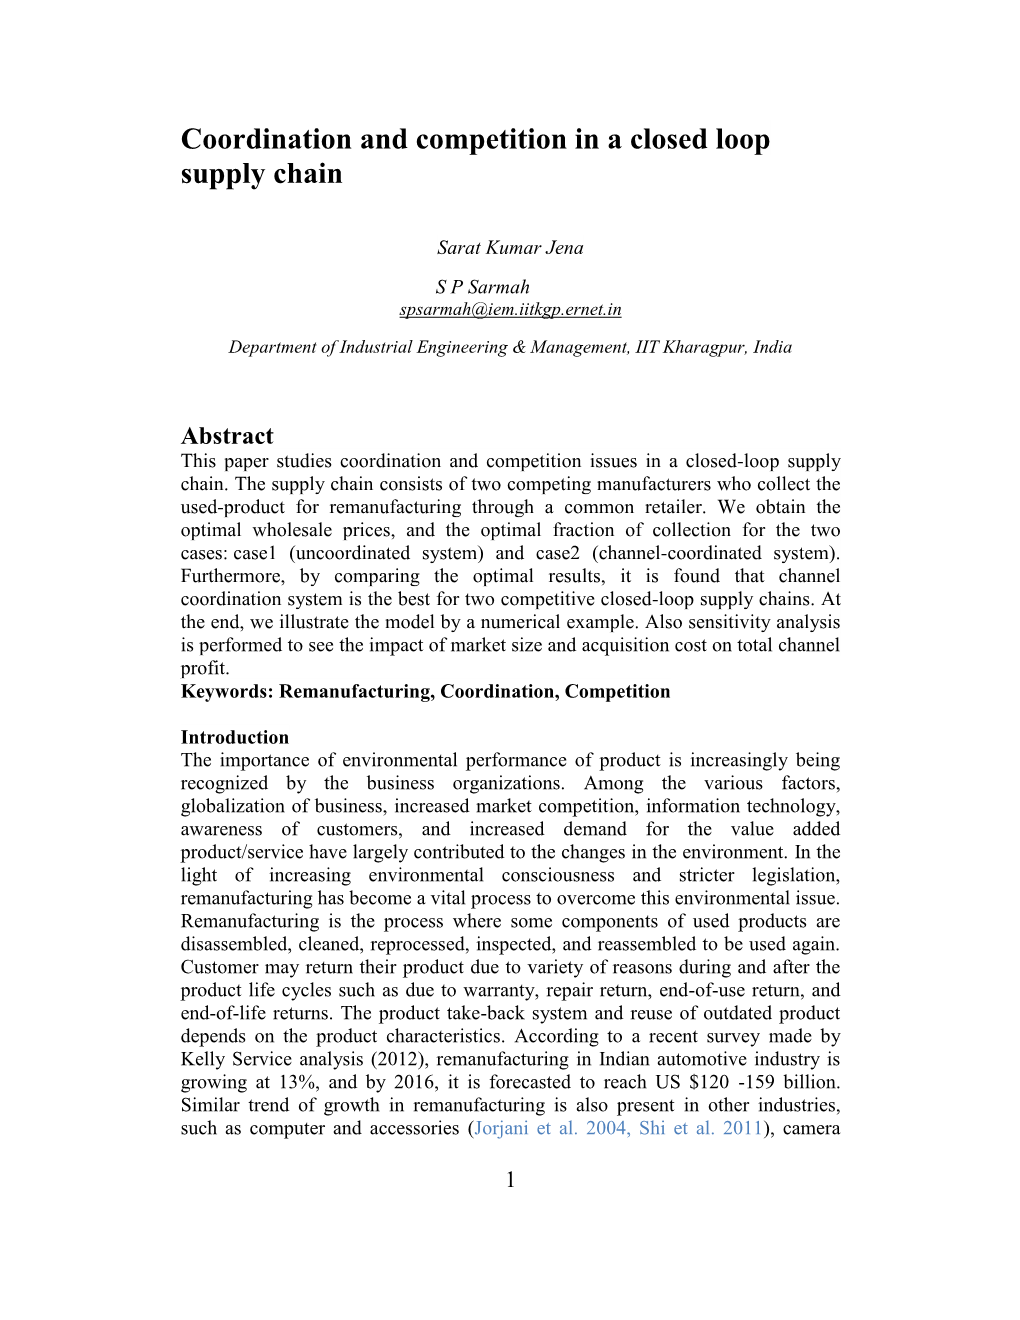 Coordination and Competition in a Closed Loop Supply Chain